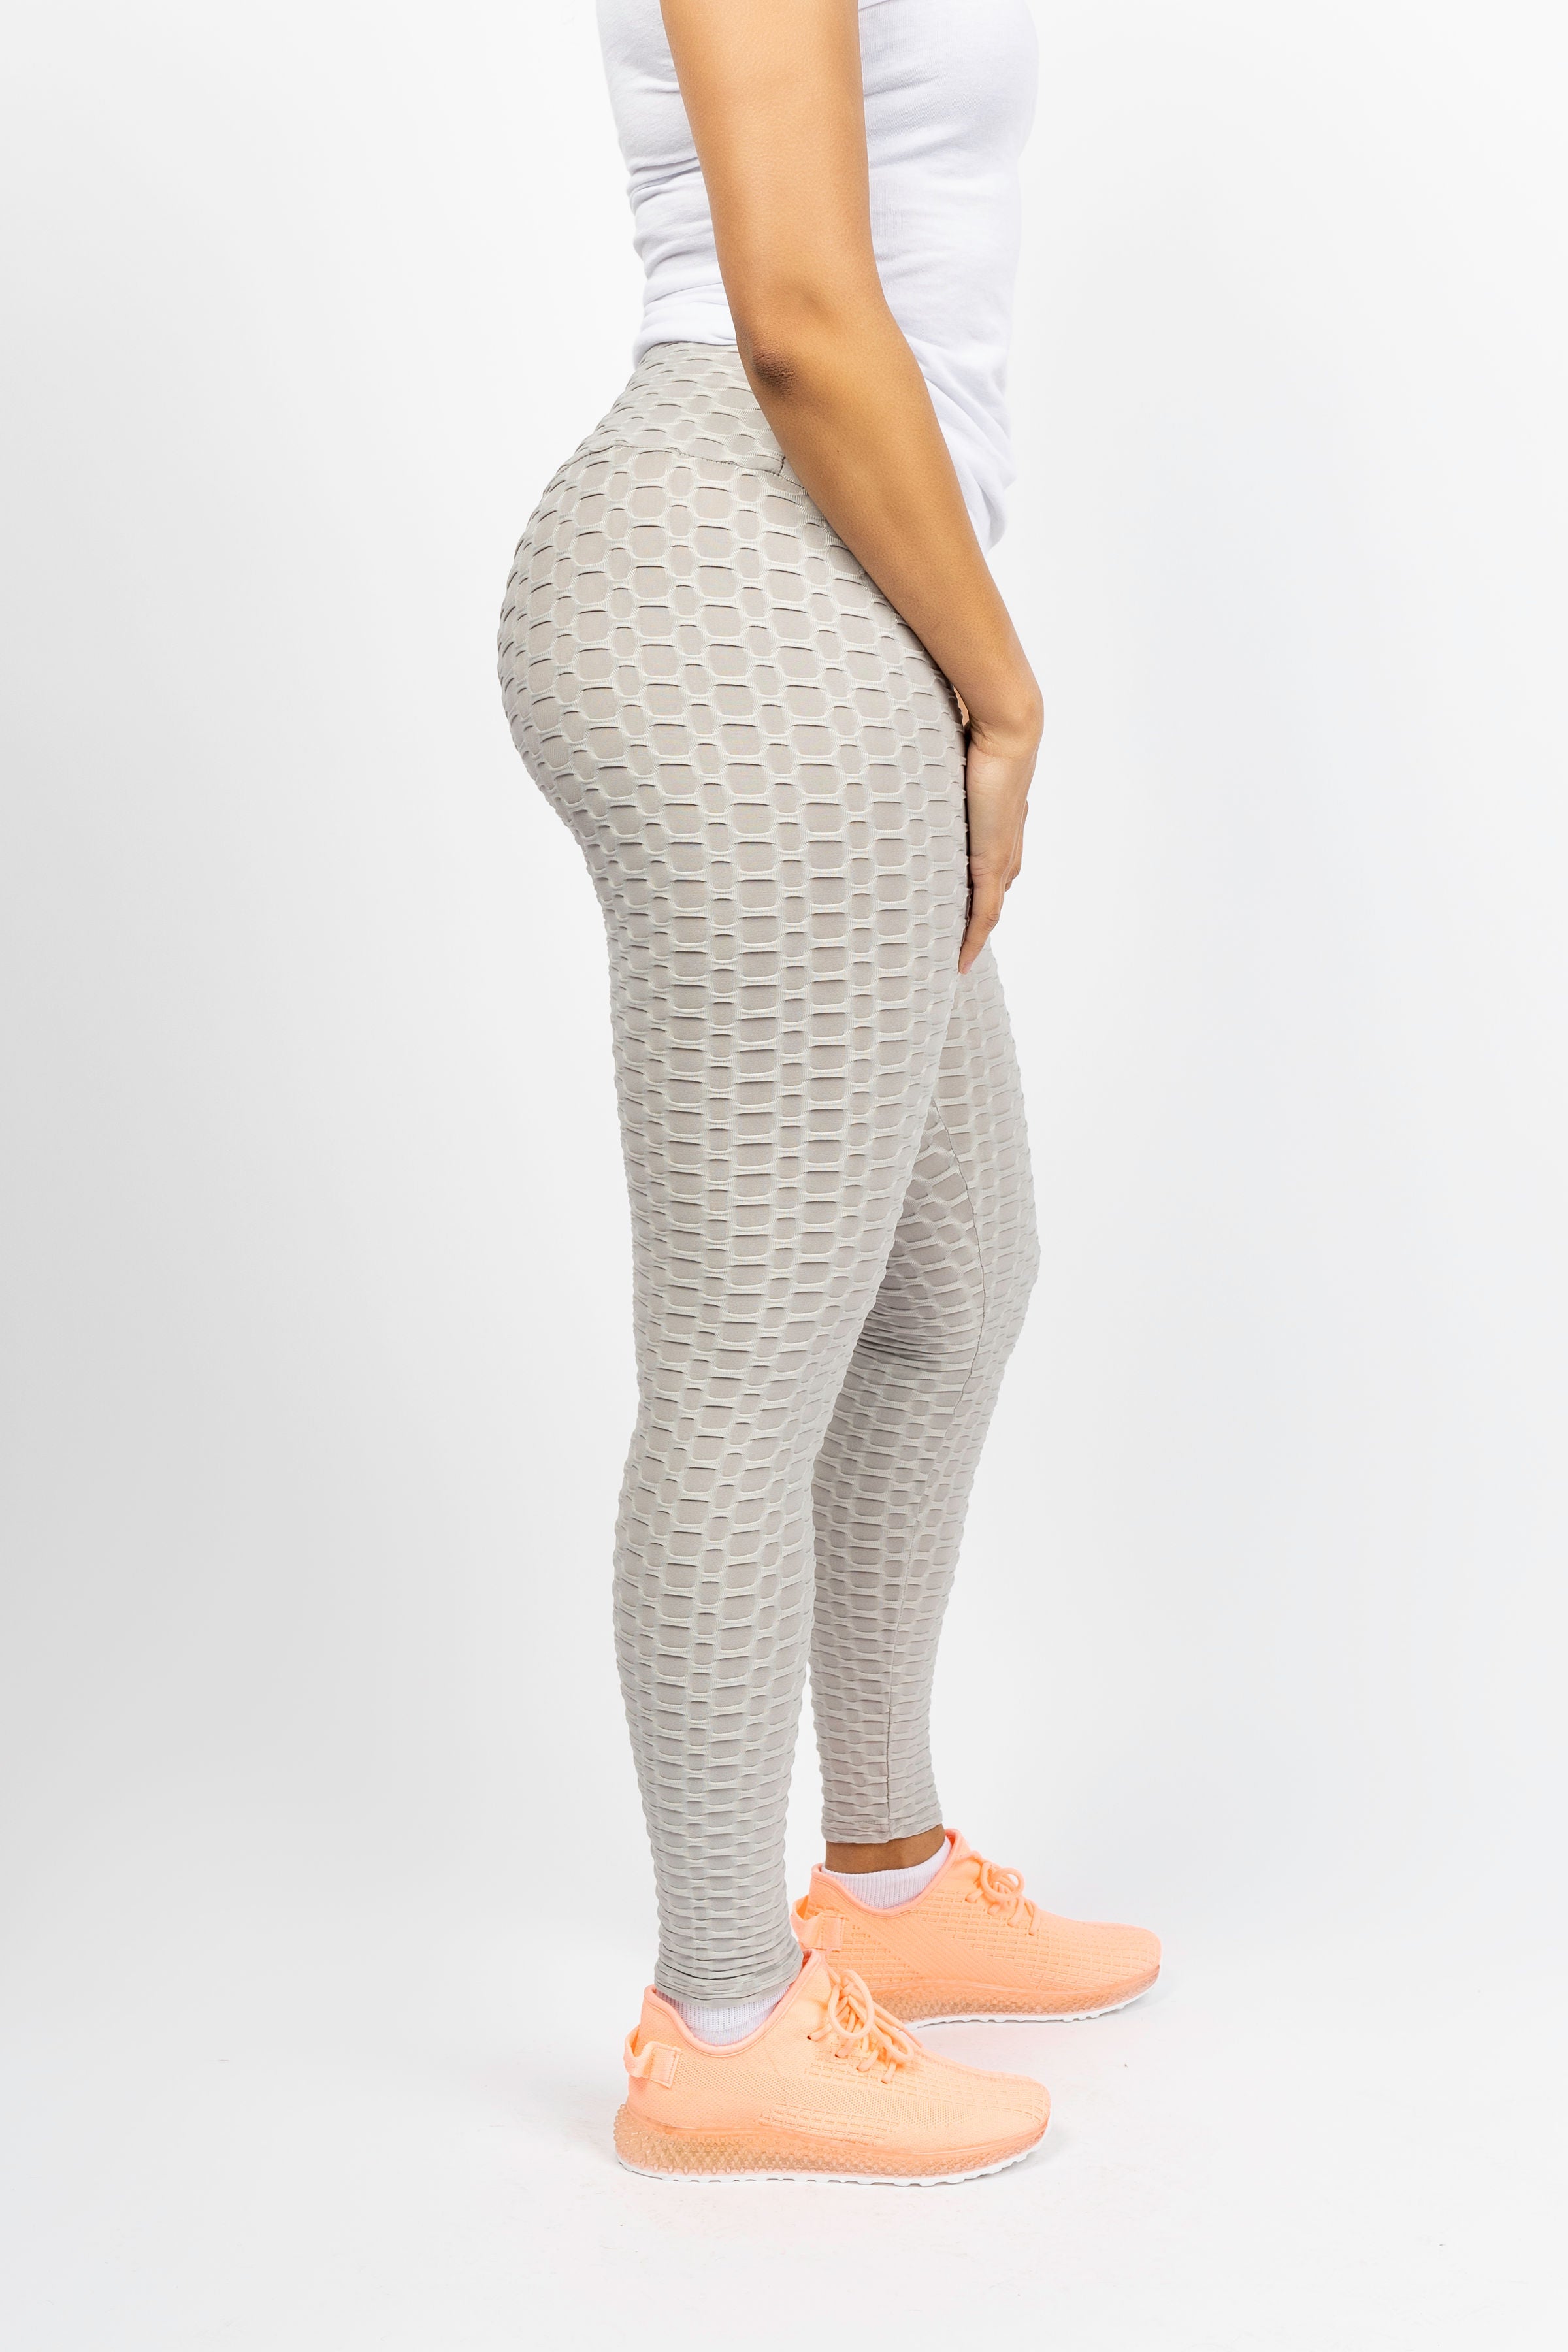 Cool Wholesale Honeycomb Leggings In Any Size And Style 